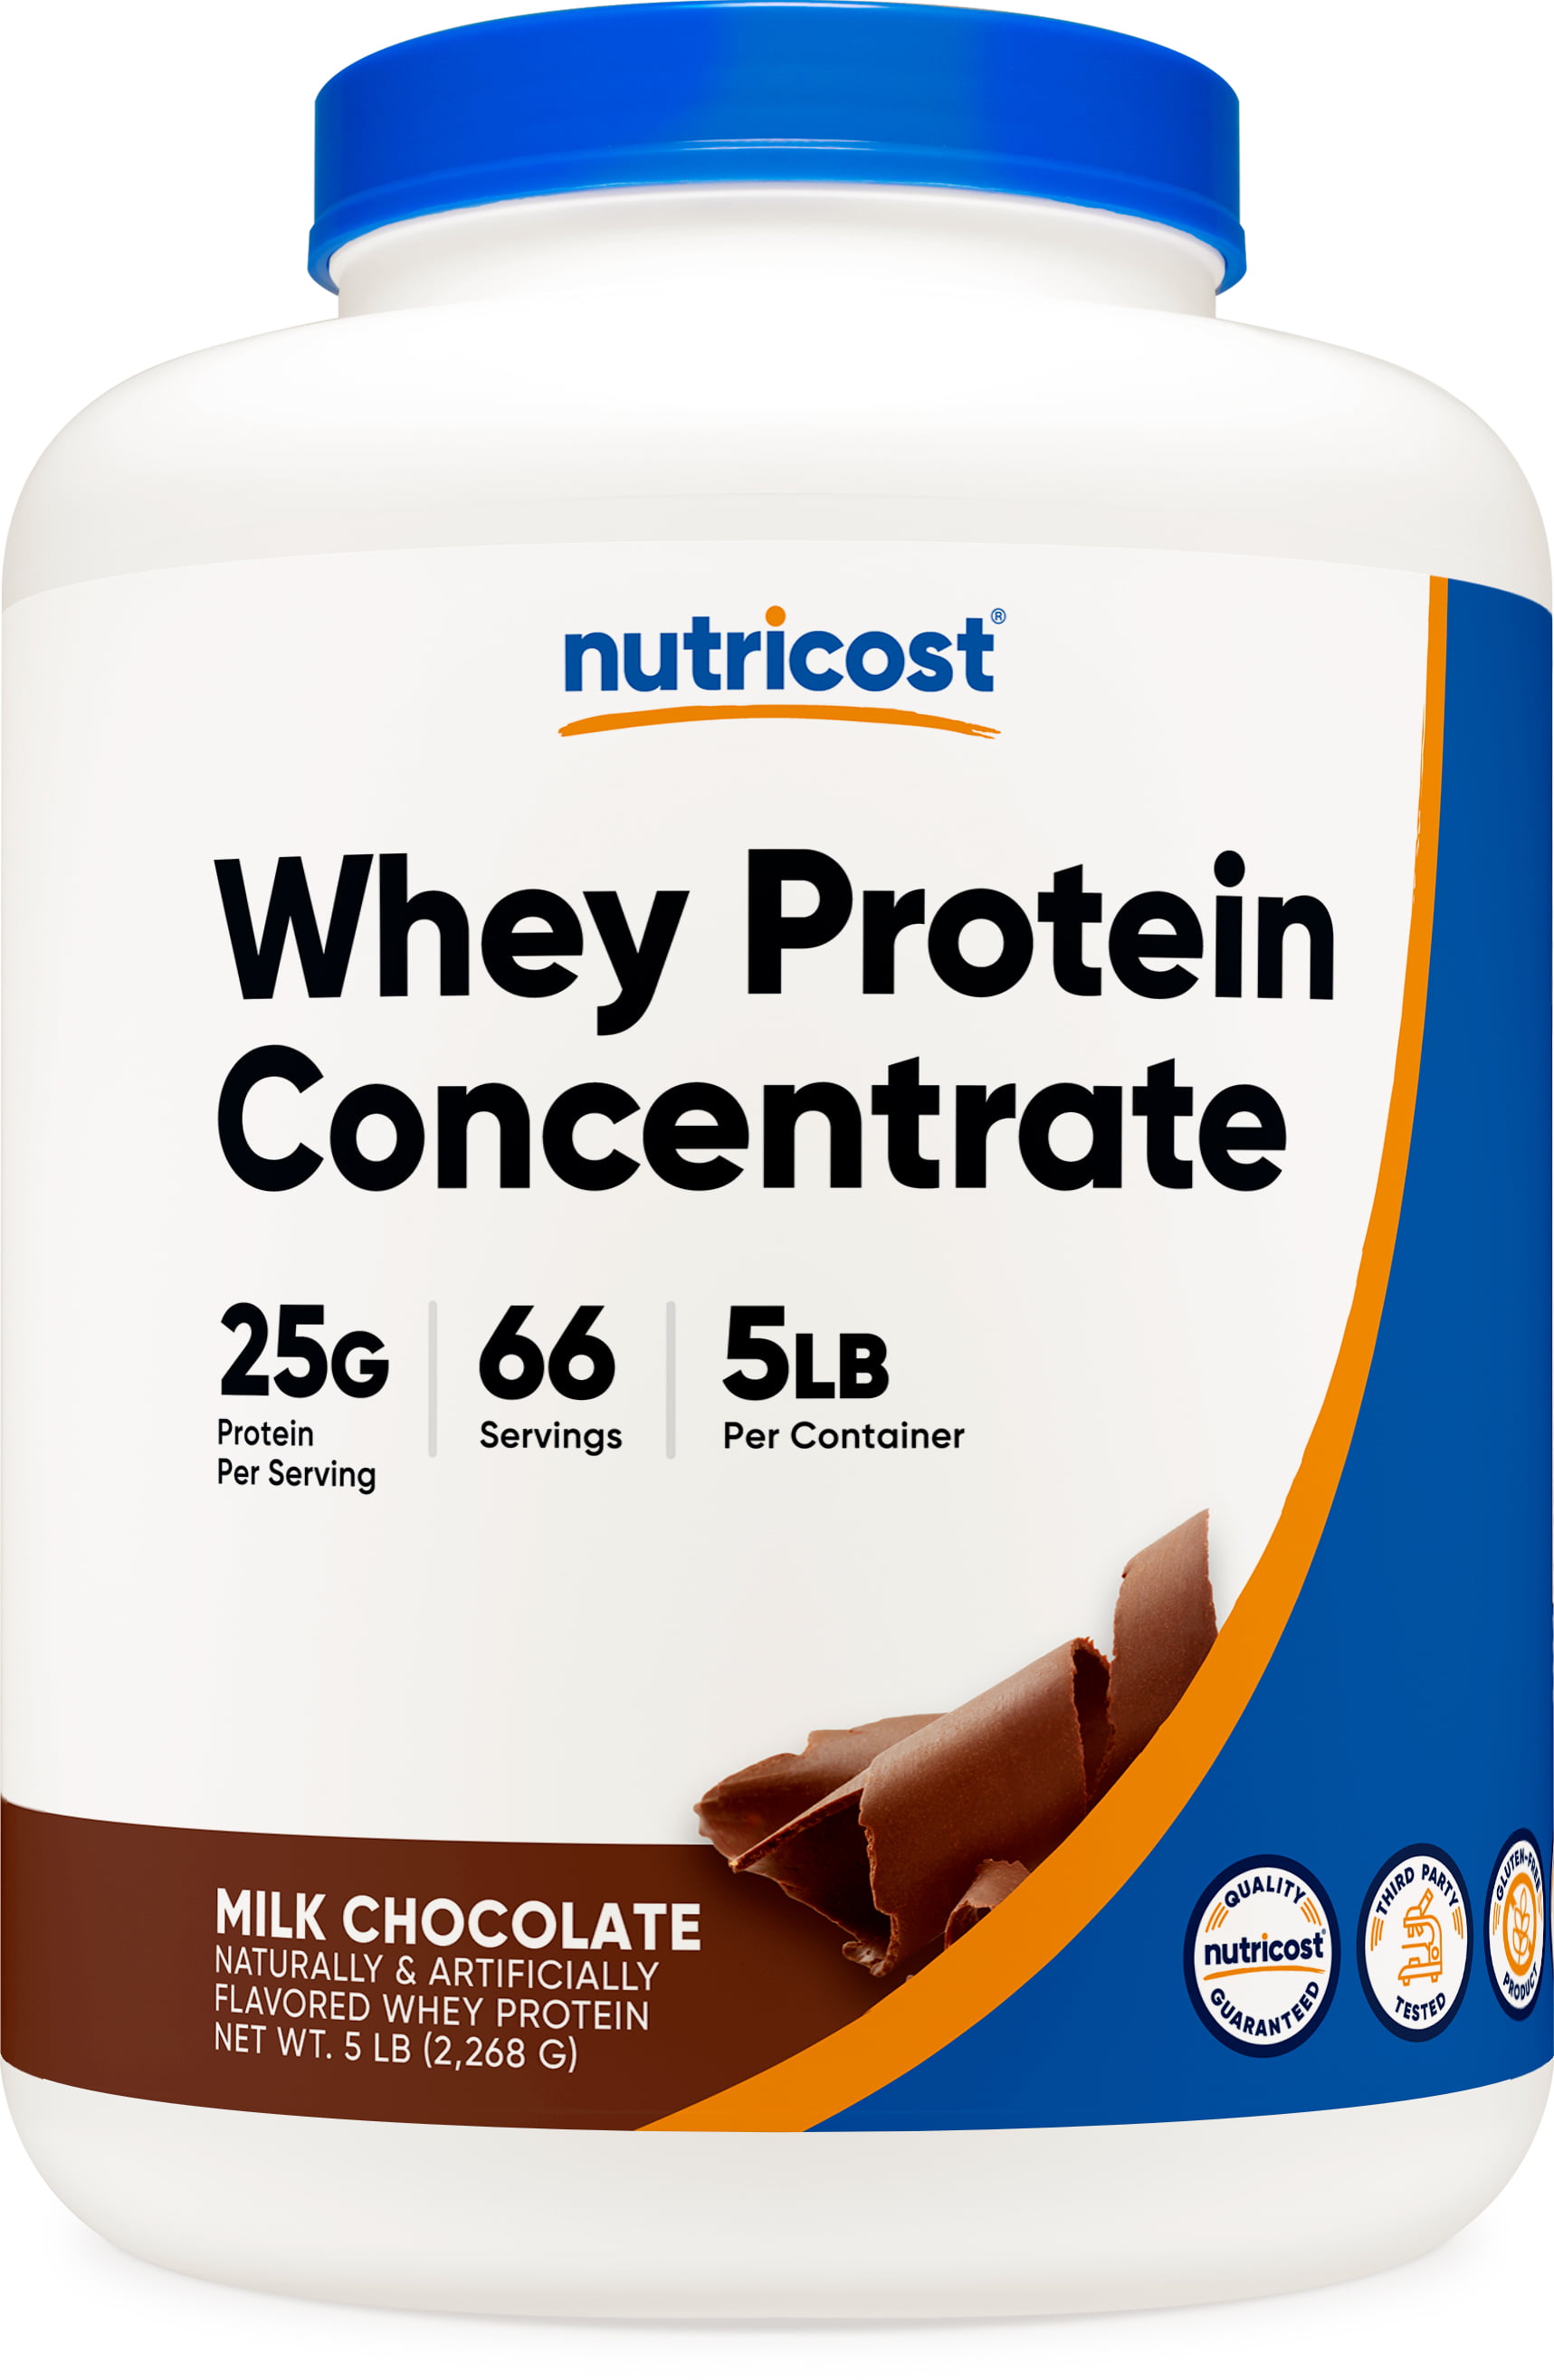 Nutricost Whey Protein Concentrate Powder (Chocolate) 5LBS, Supplement